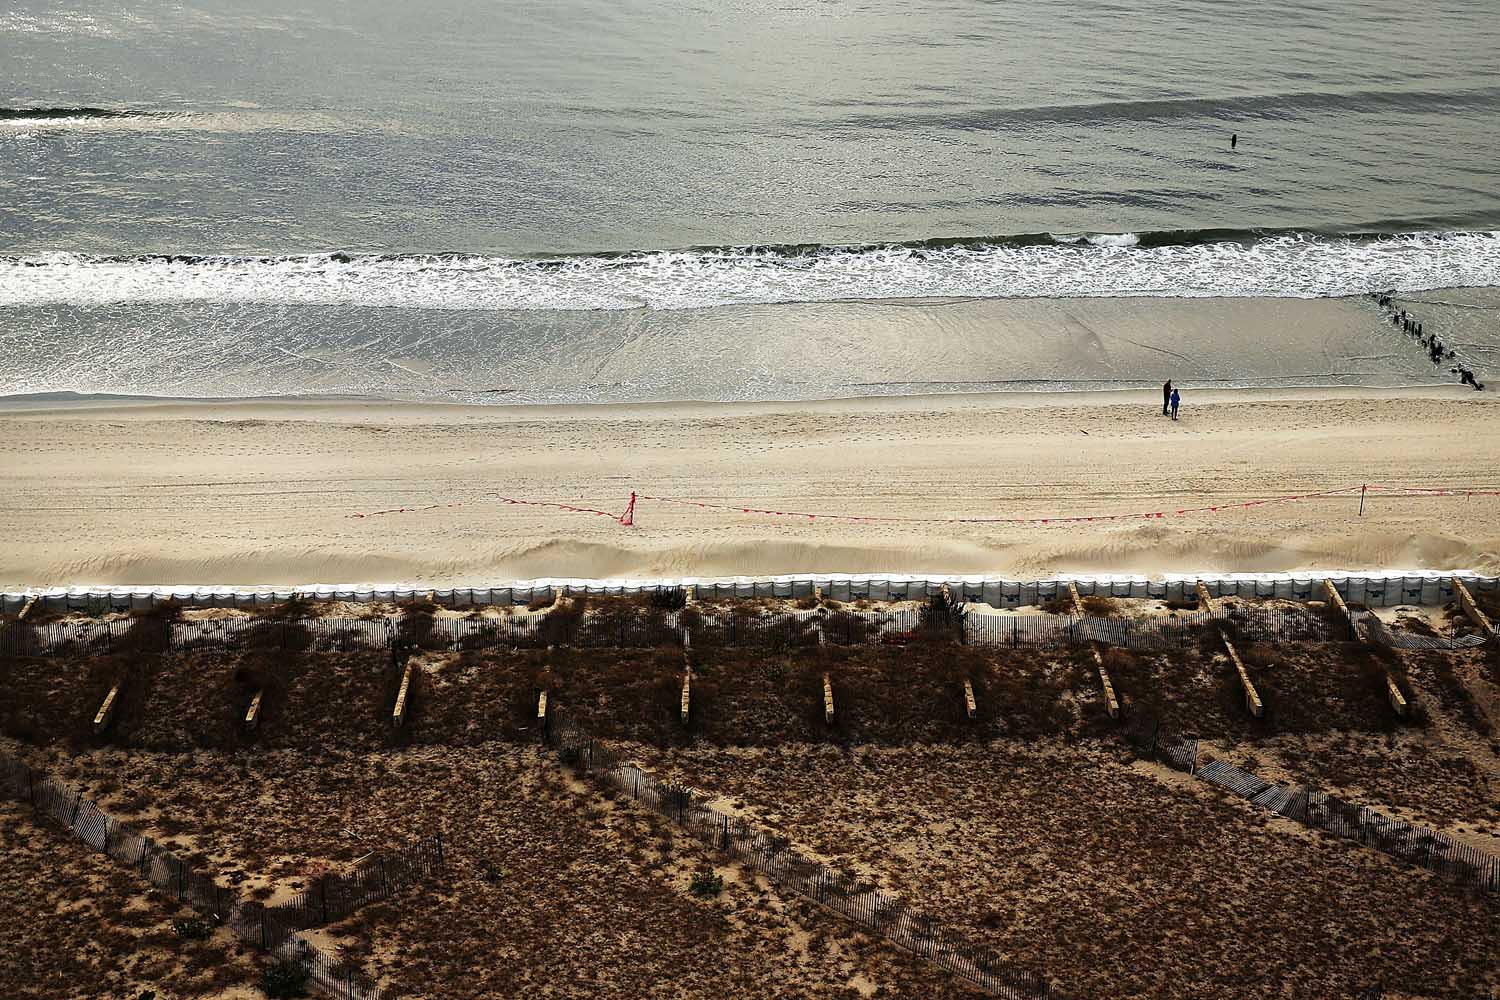 Oct. 22, 2013. People stand on a beach near the remains of the Rockaway boardwalk, damaged in Hurricane Sandy in the in Rockaway neighborhood of the Queens borough of New York City.